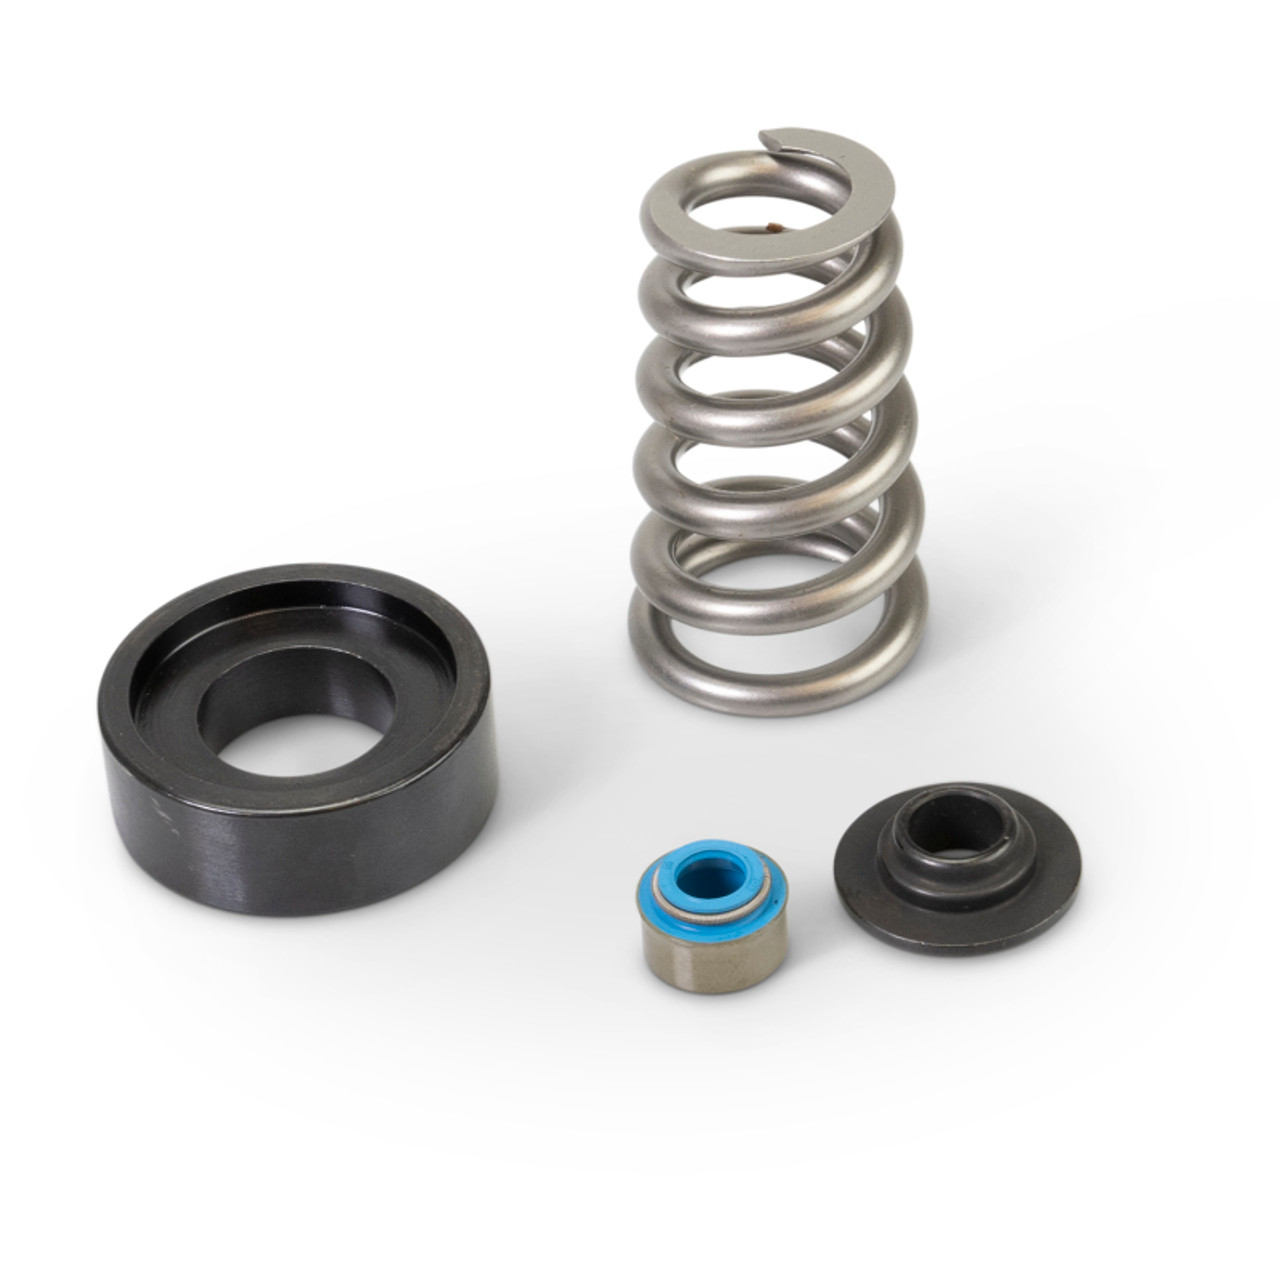 COMP Cams Conical Valve Spring Kit 2020+ Ford 7.3L Godzilla Engine - 7230GCS-KIT Photo - out of package